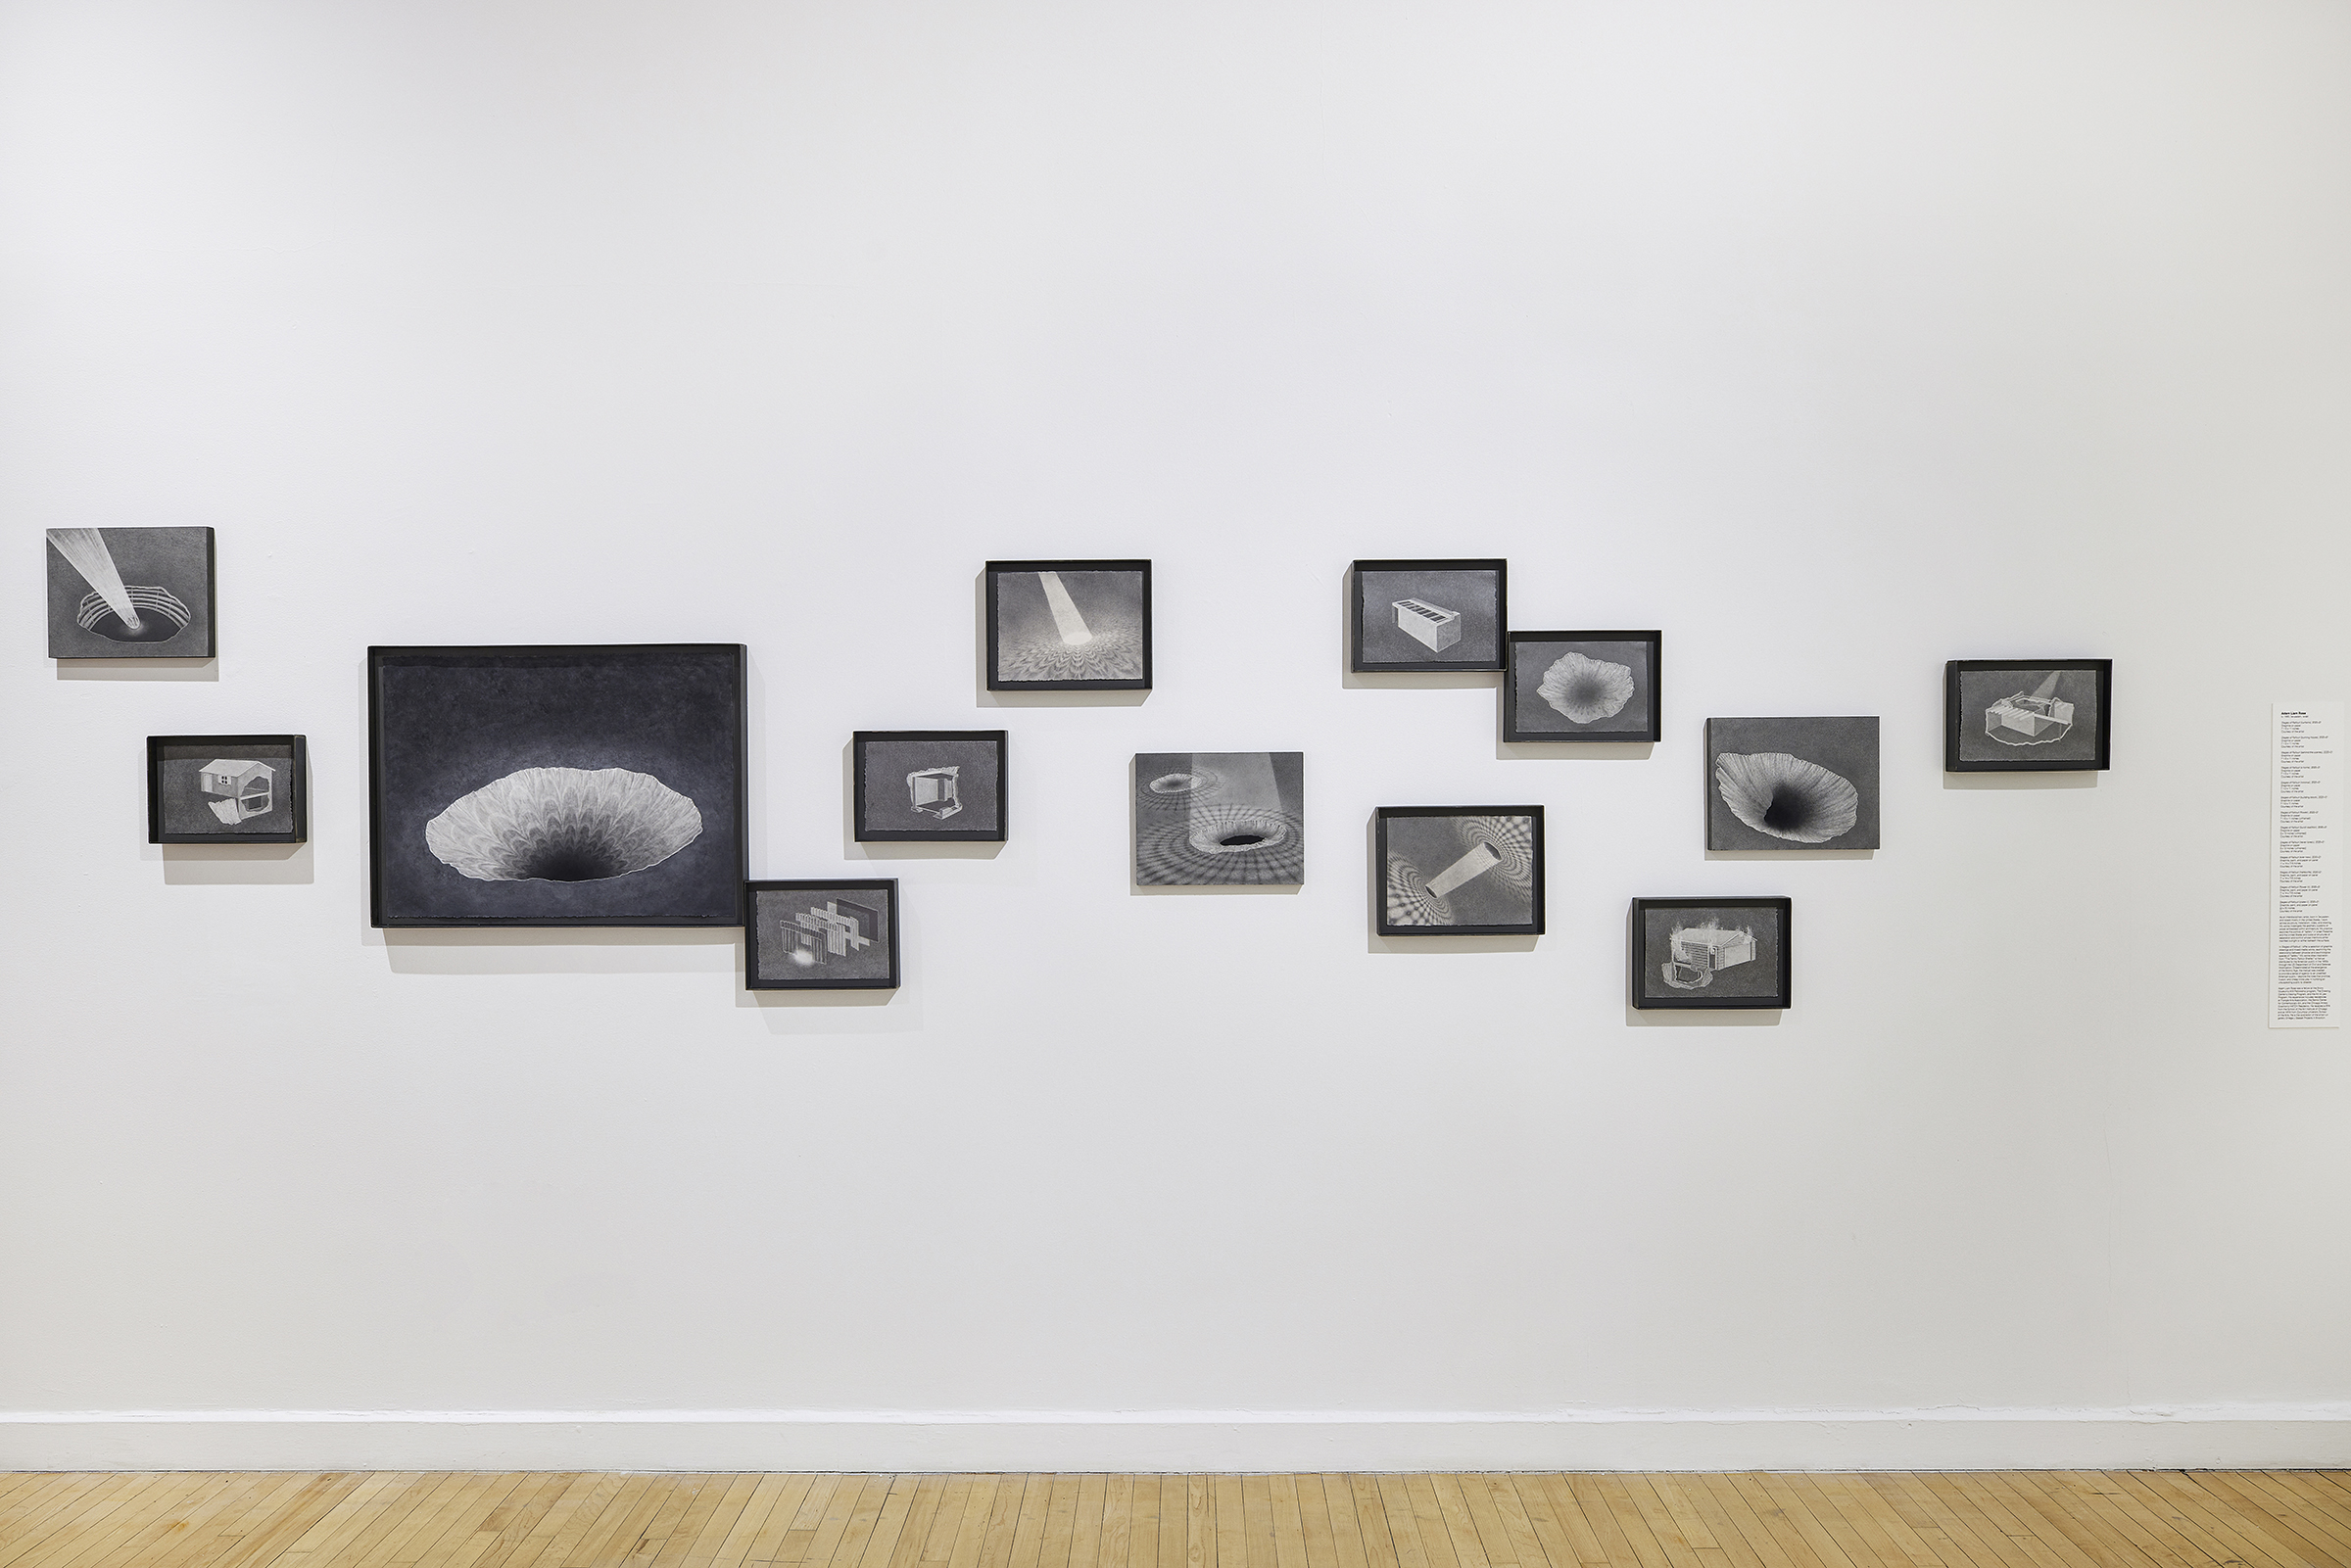 Installation shot of “Stages of Fallout” showing a constellation of graphite drawings hanging against a white wall at various heights. Each drawing is framed in a grey steel frame.